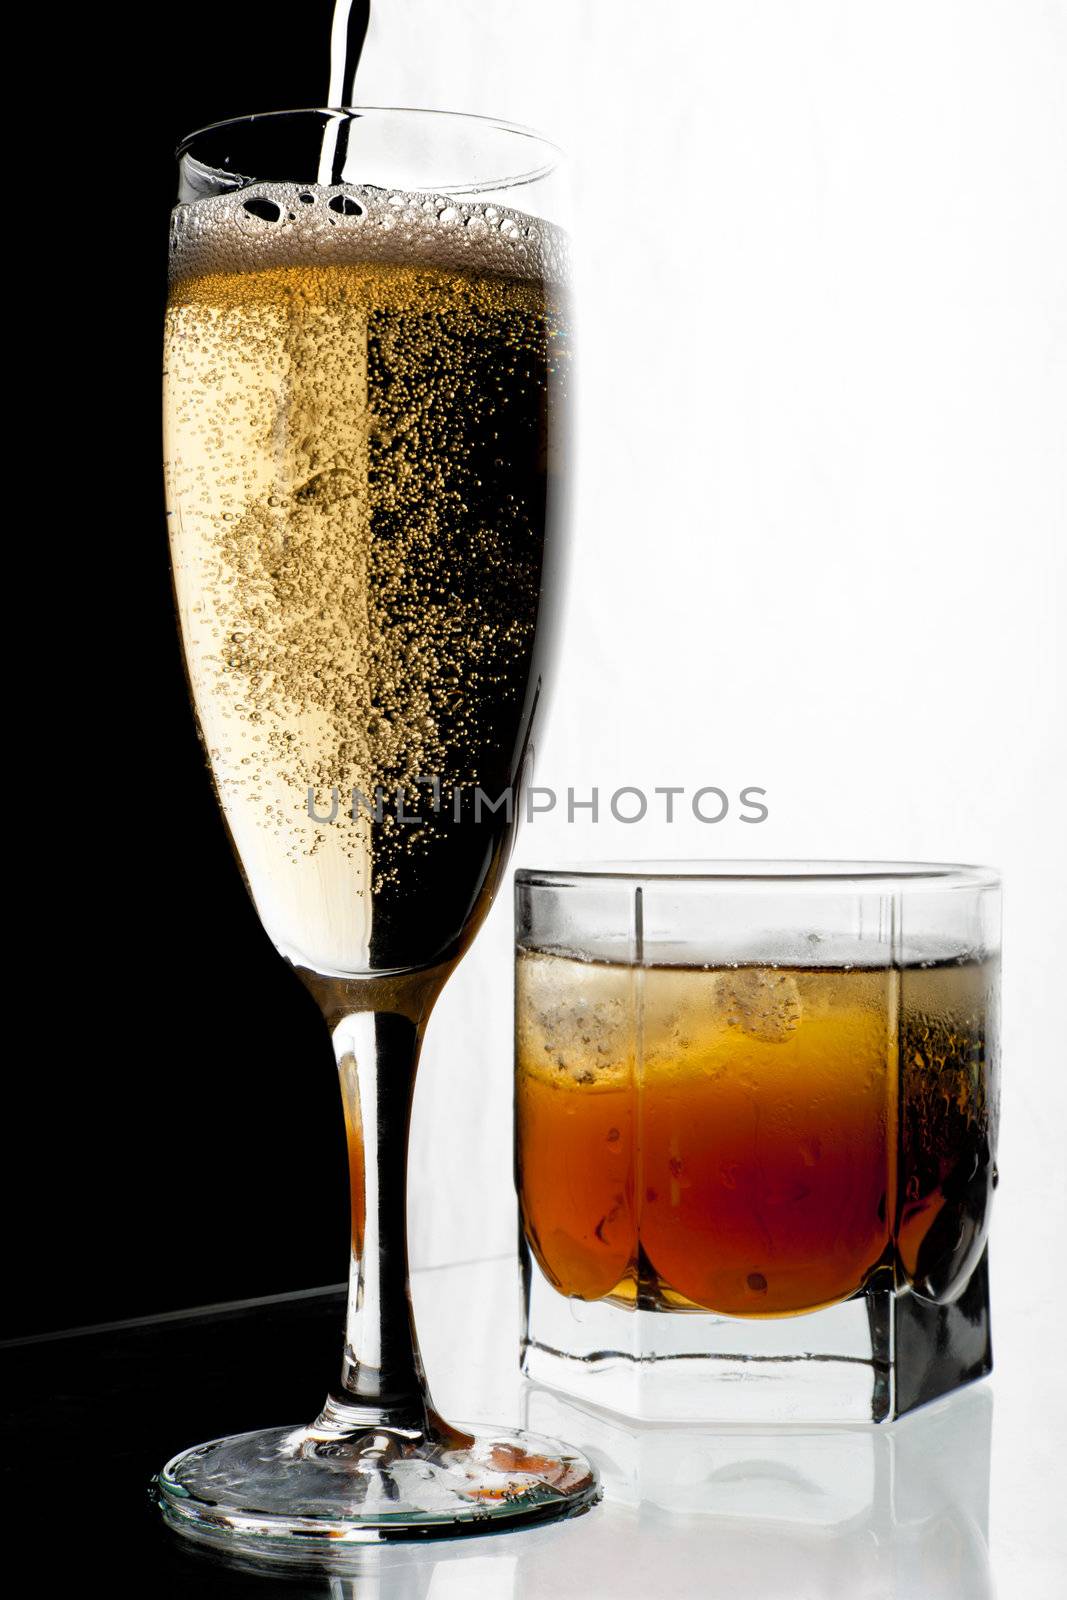 Glass of champagne and whisky with ice. A black and white background.